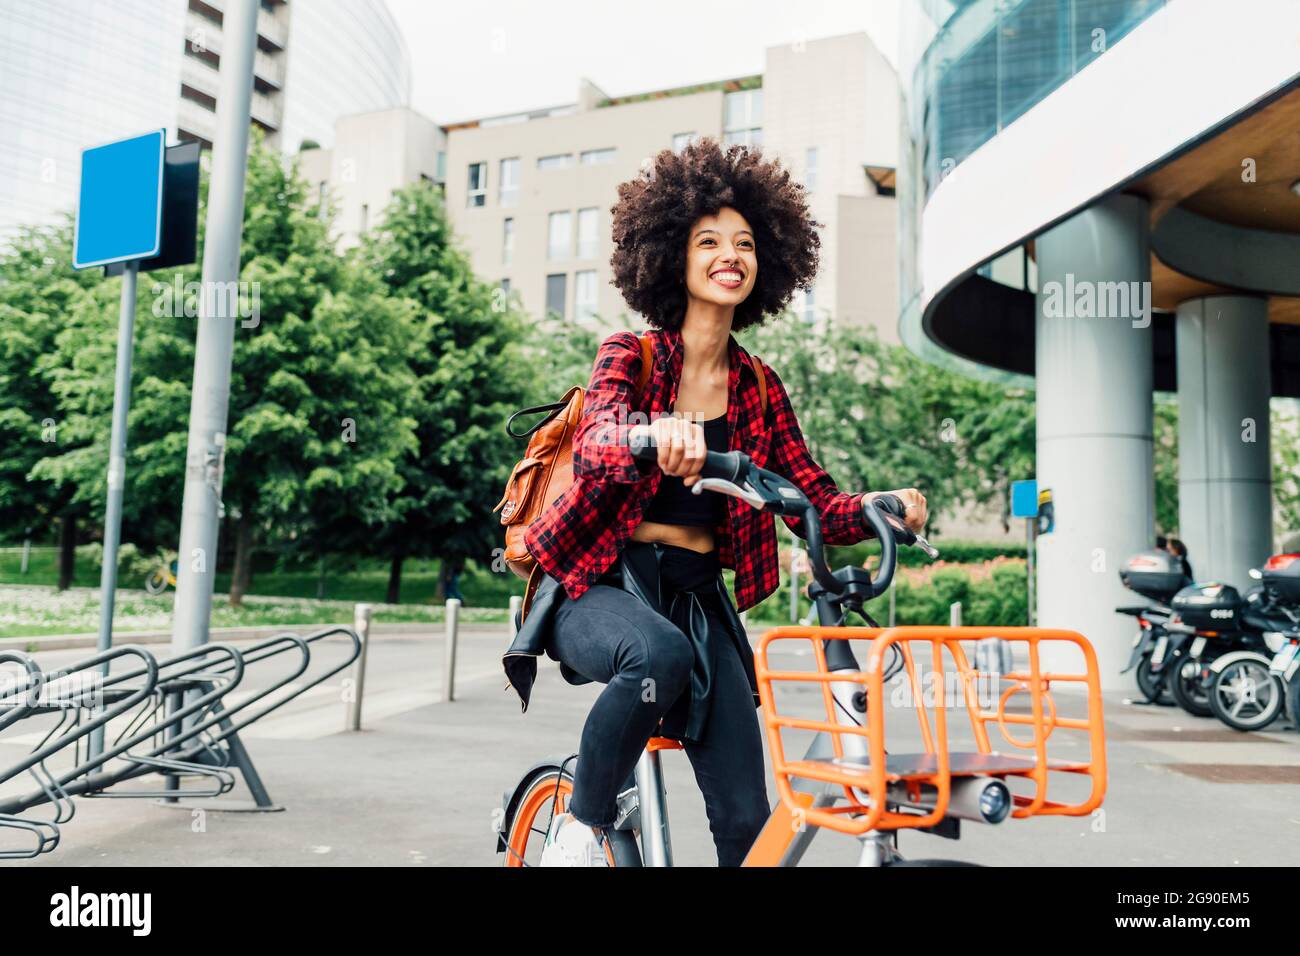 Cheerful young woman cycling in city Stock Photo